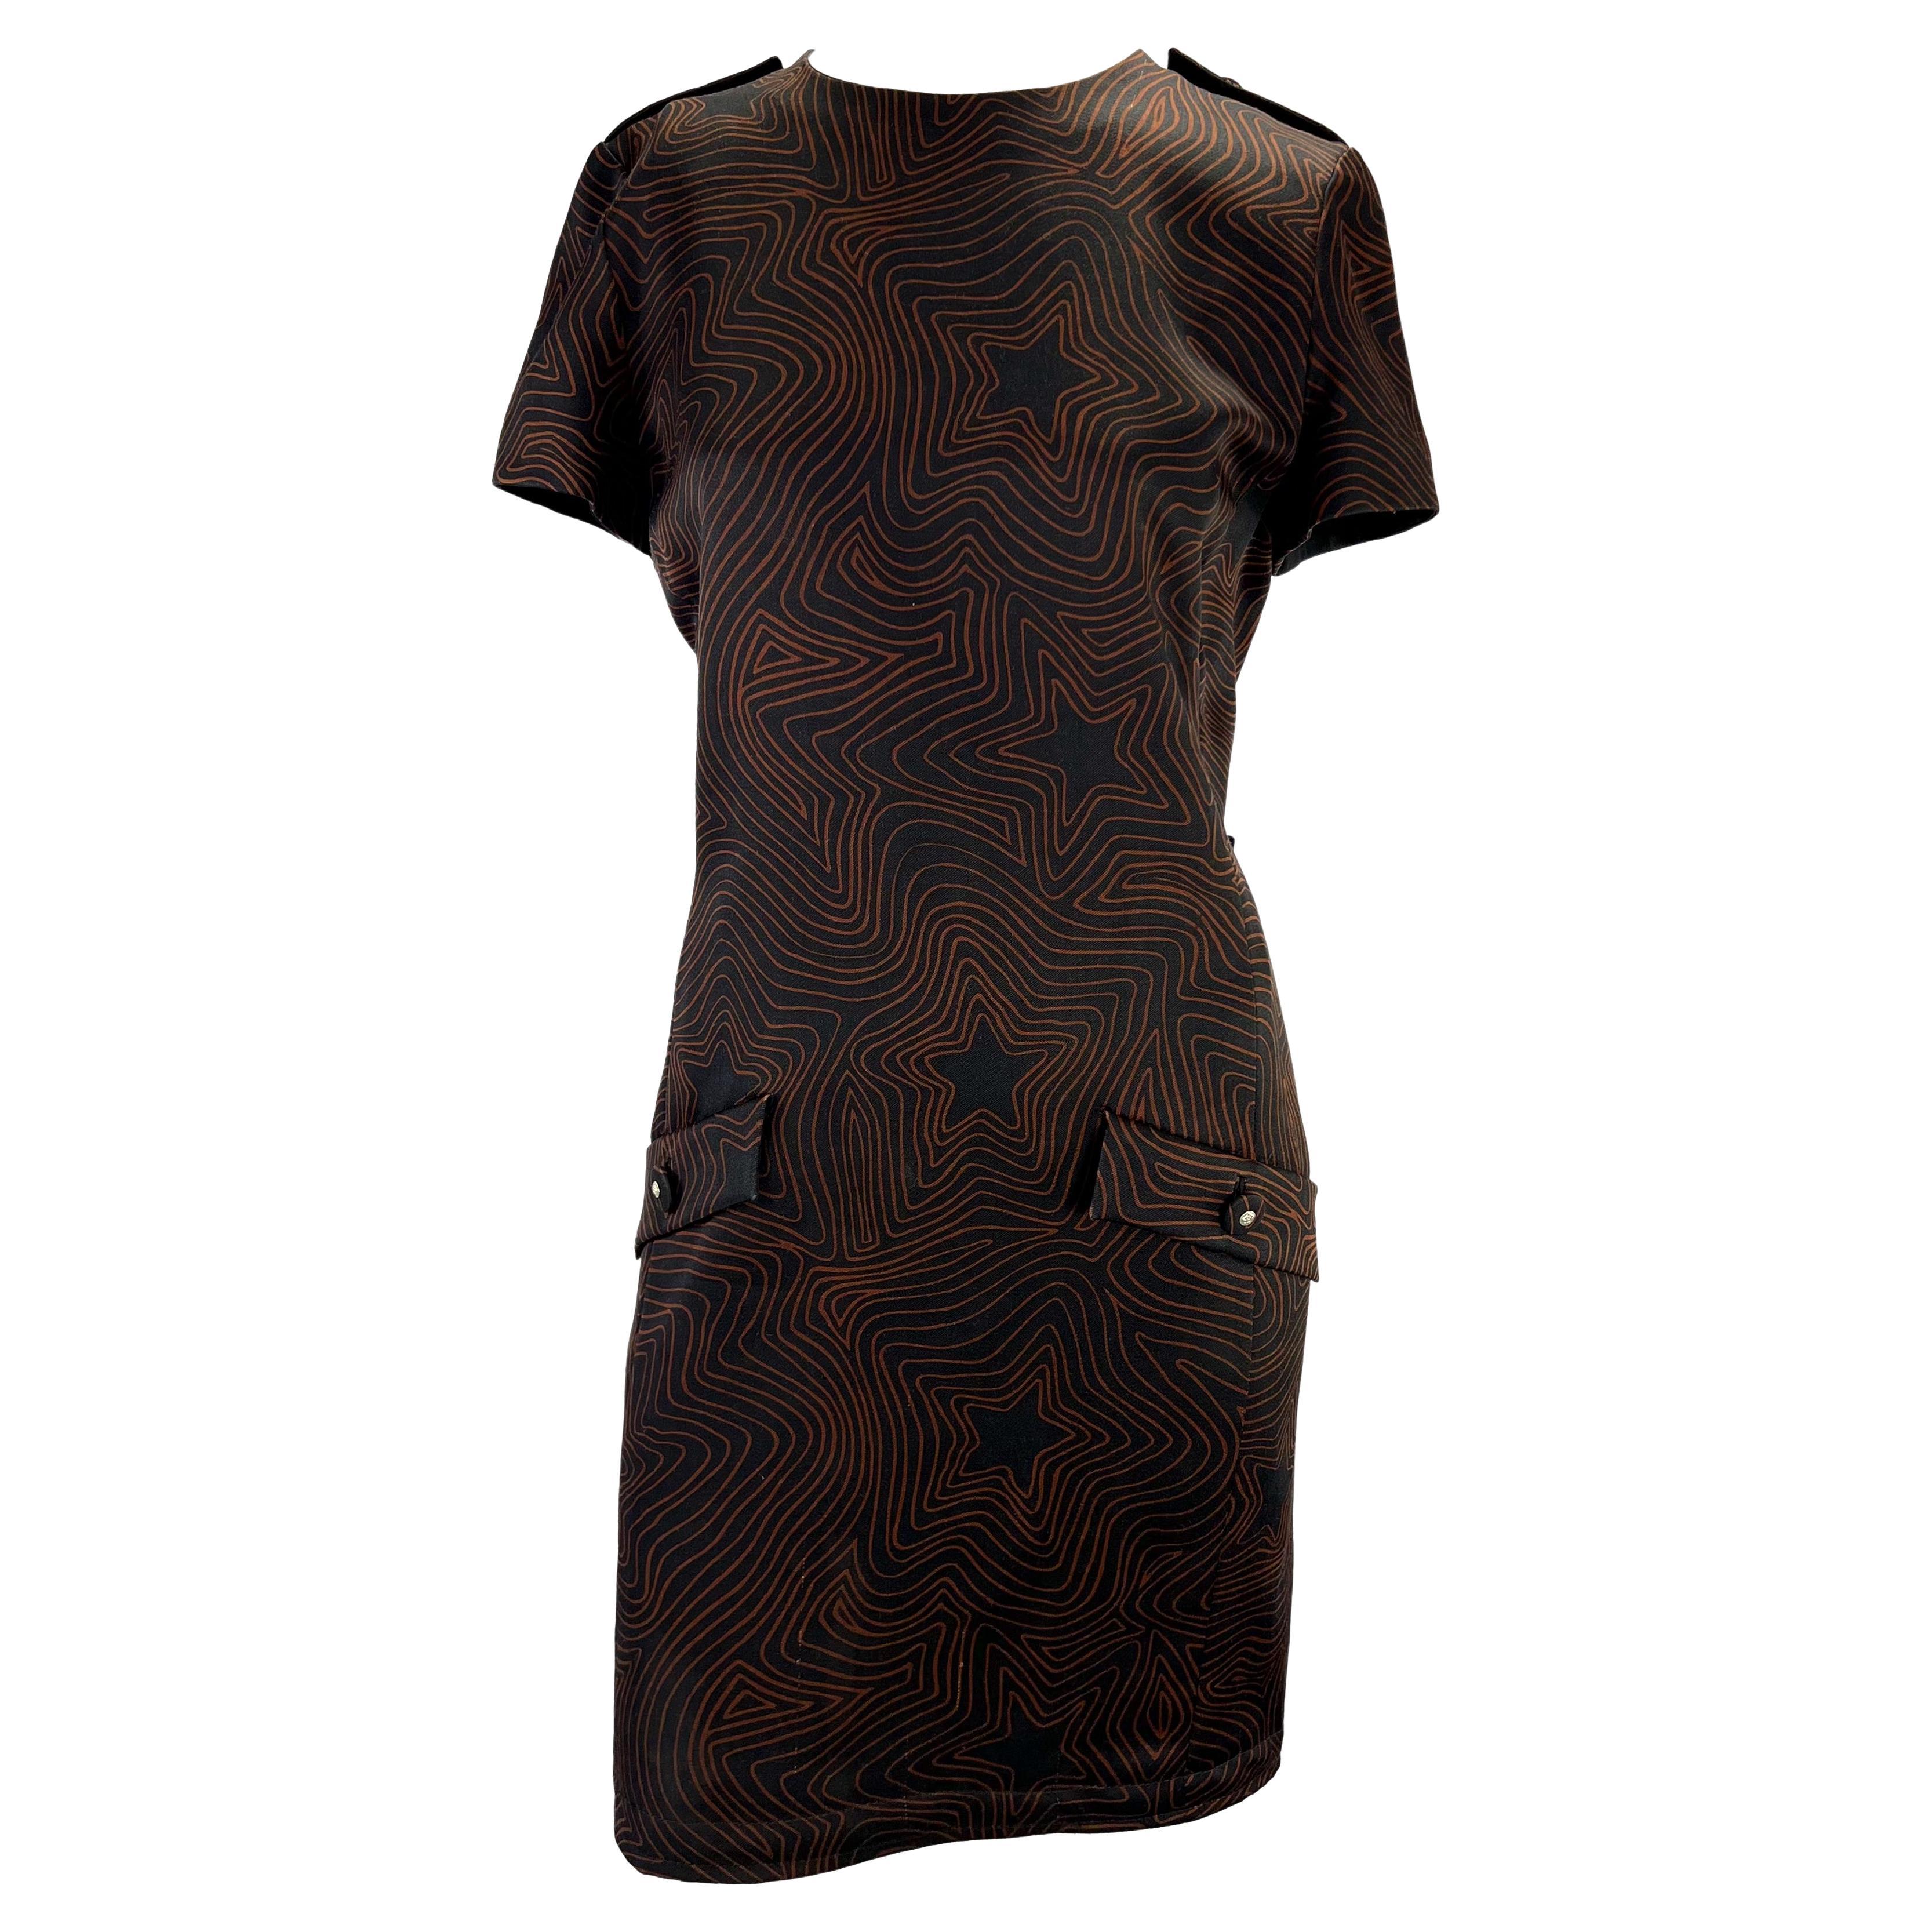 S/S 1996 Gianni Versace Couture Black Brown Star Print Medusa Wool Dress For Sale